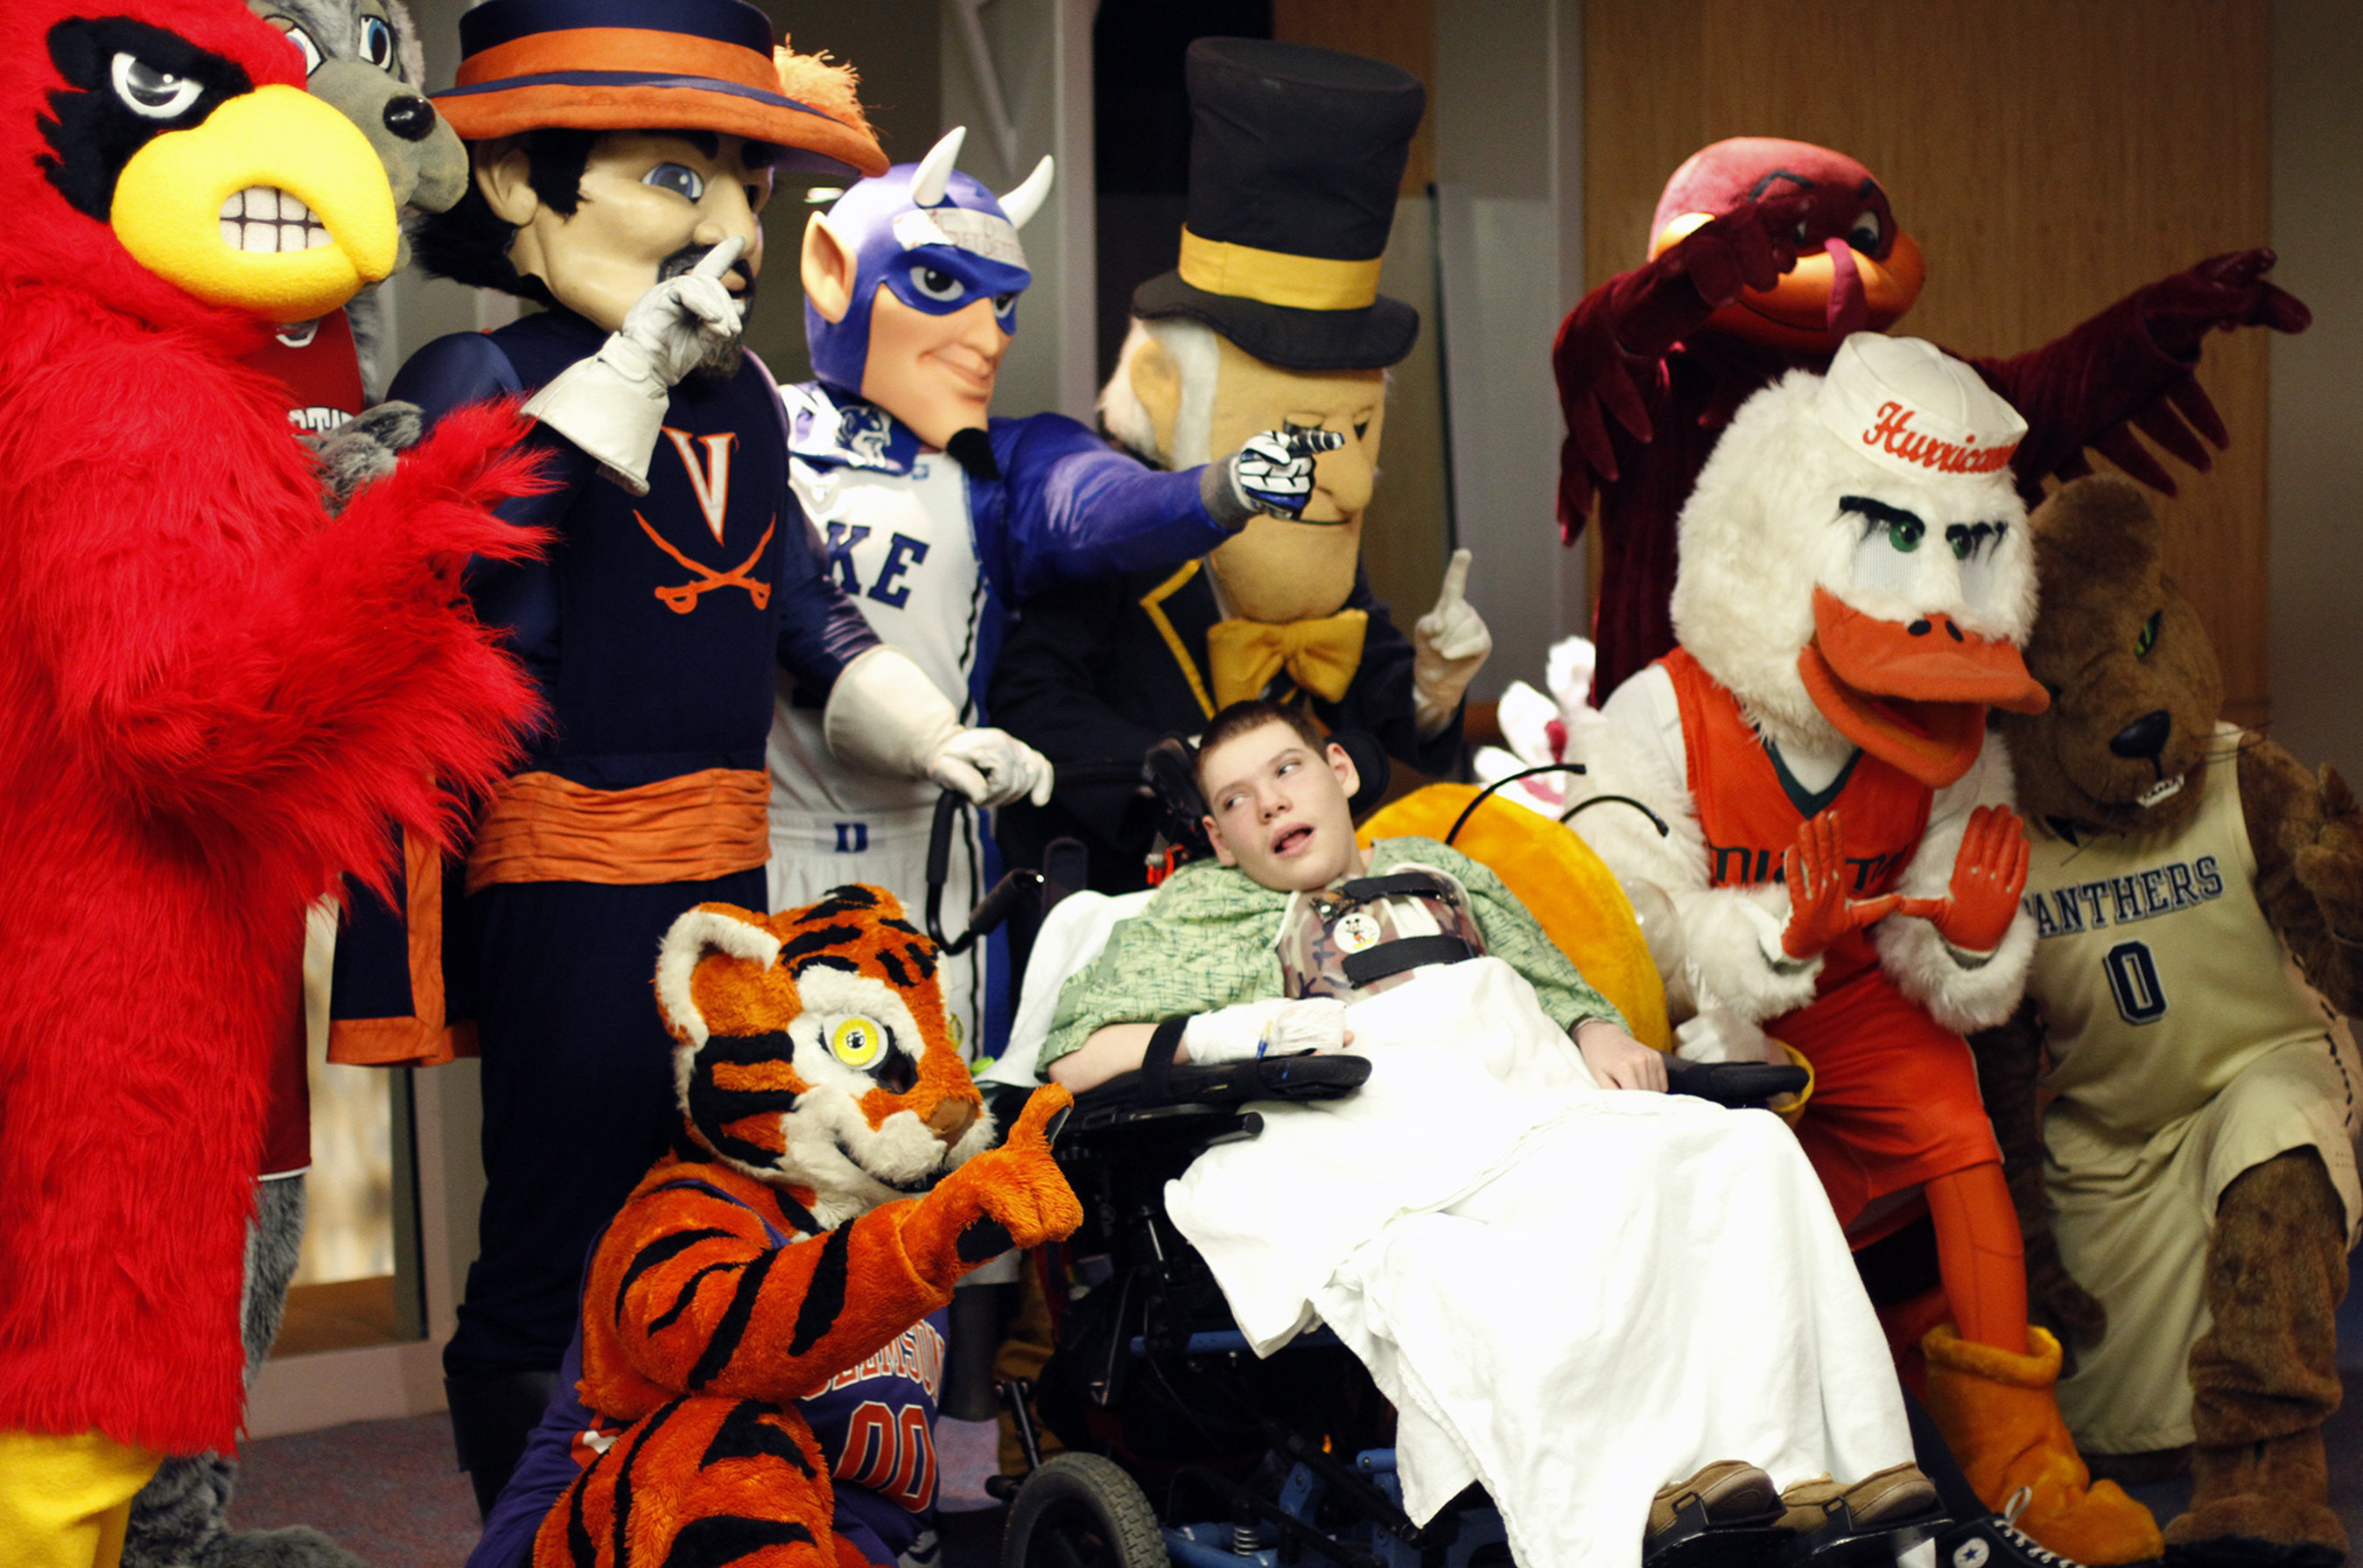 A huge basketball fan, sixteen-year-old Ryan Shelton had a great time meeting all of the ACC mascots. The mascots visited Brenner Children's Hospital as part of an outreach initiative for the 2015 ACC Men's Basketball Tournament.